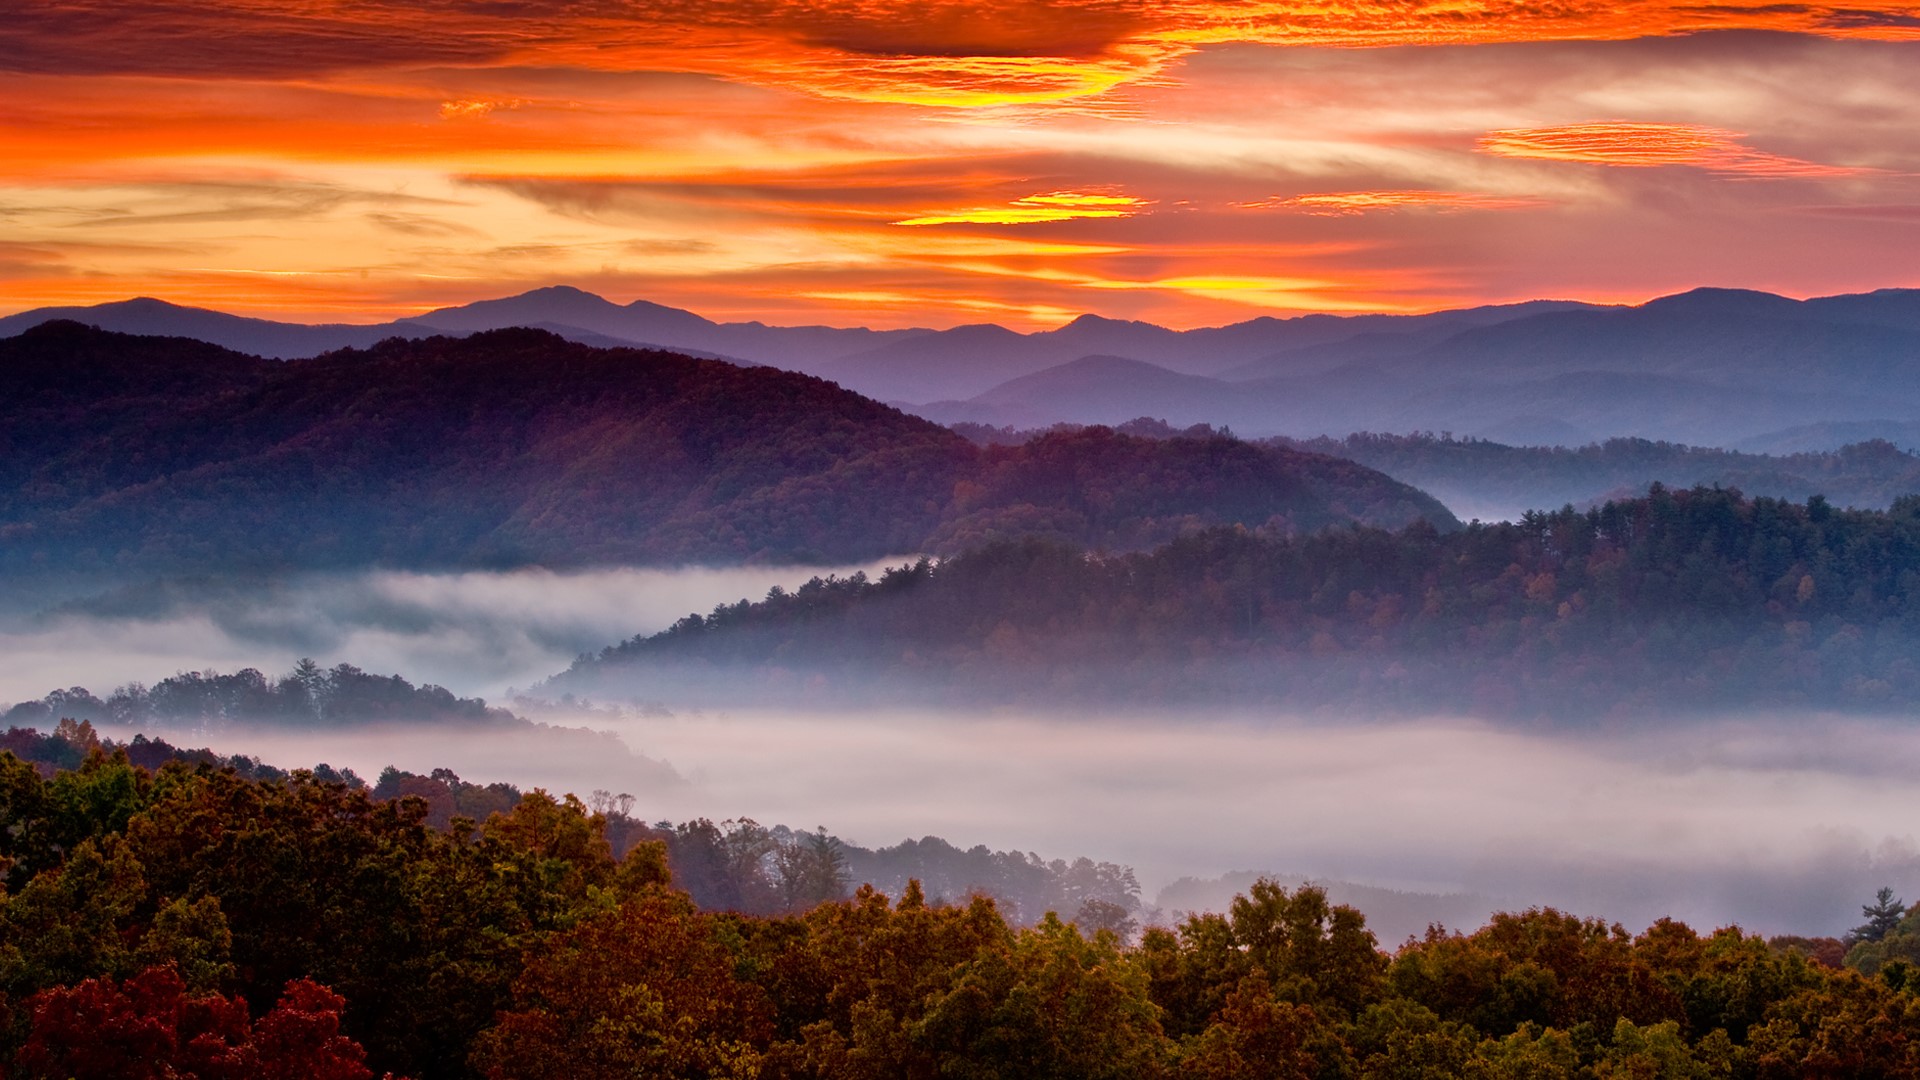 Sunrise over the Smoky Mountains in autumn from the Foothills Parkway ...